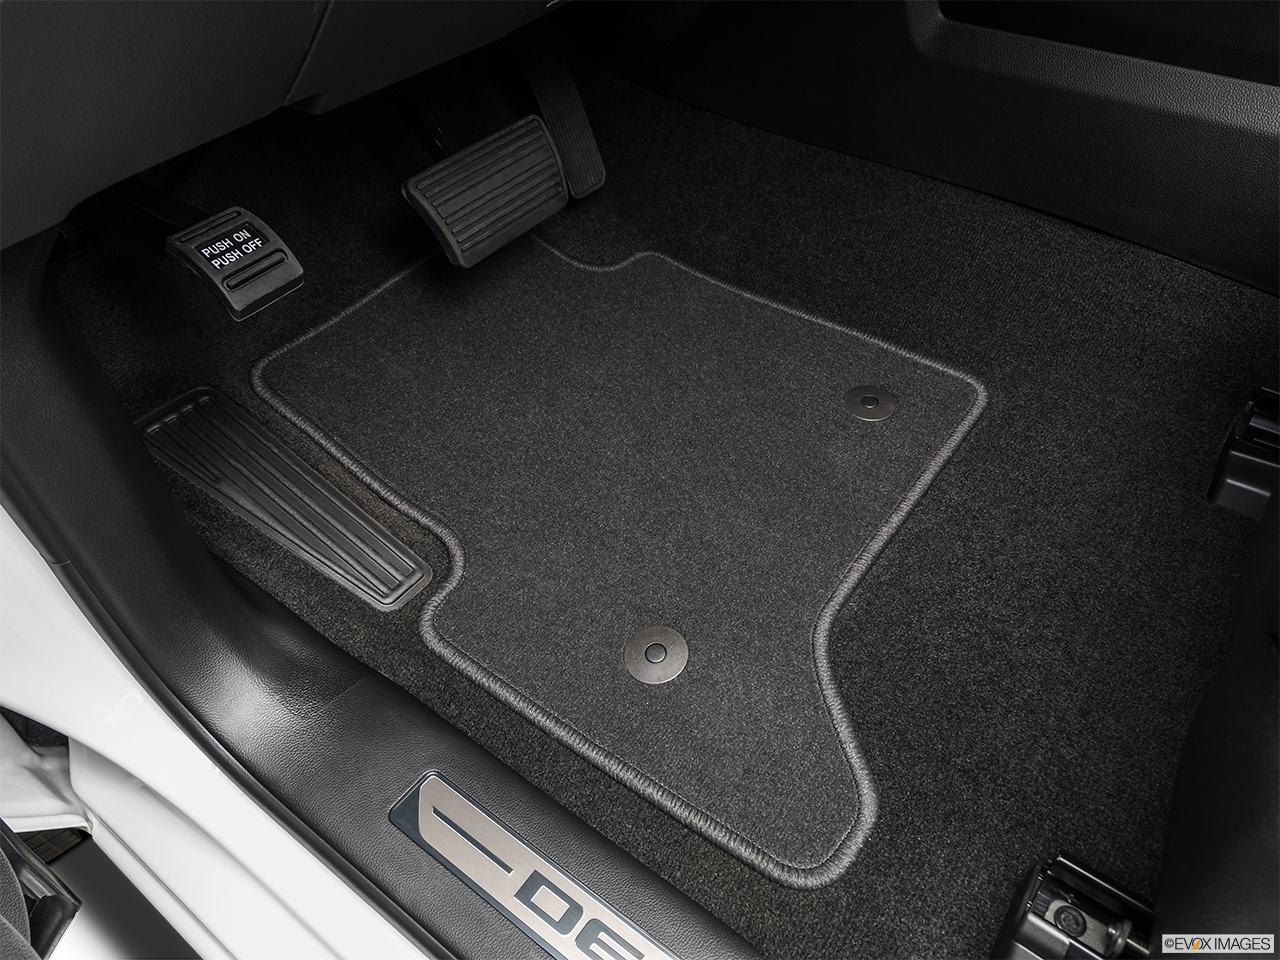 2019 GMC Sierra 2500HD Denali Driver's floor mat and pedals. Mid-seat level from outside looking in. 